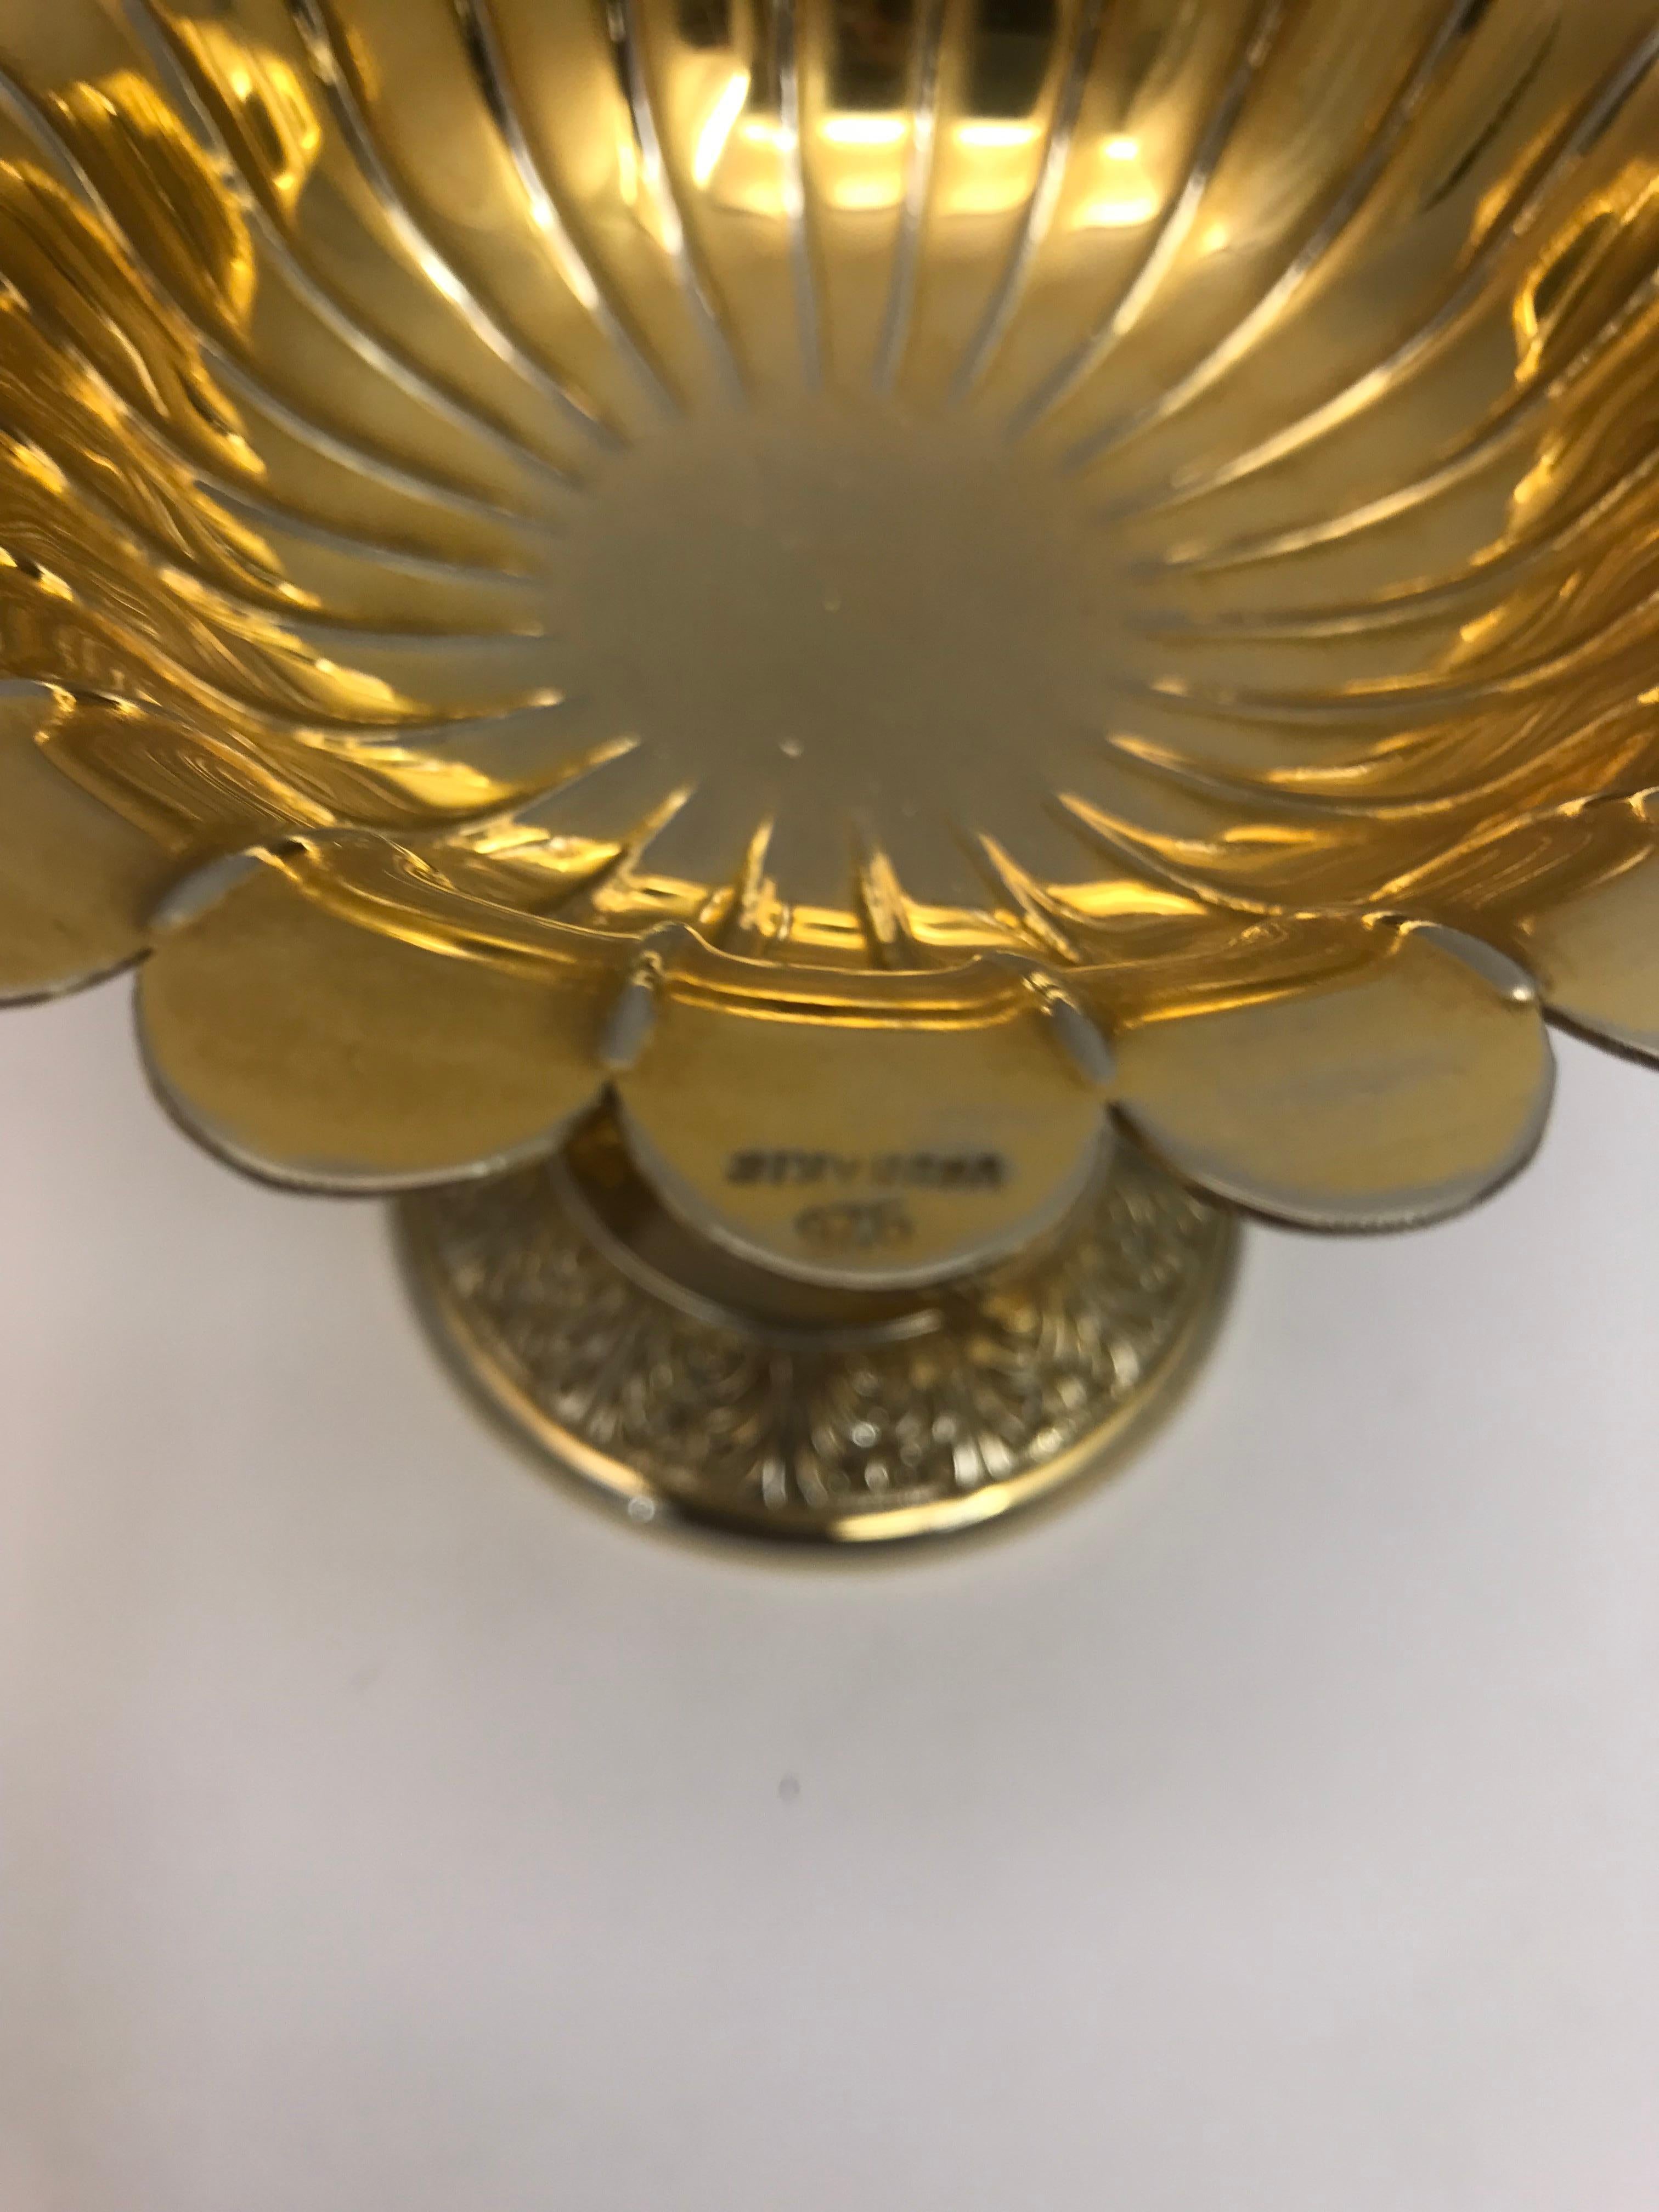 Greek Silver Gilt Tazza In Good Condition For Sale In London, London